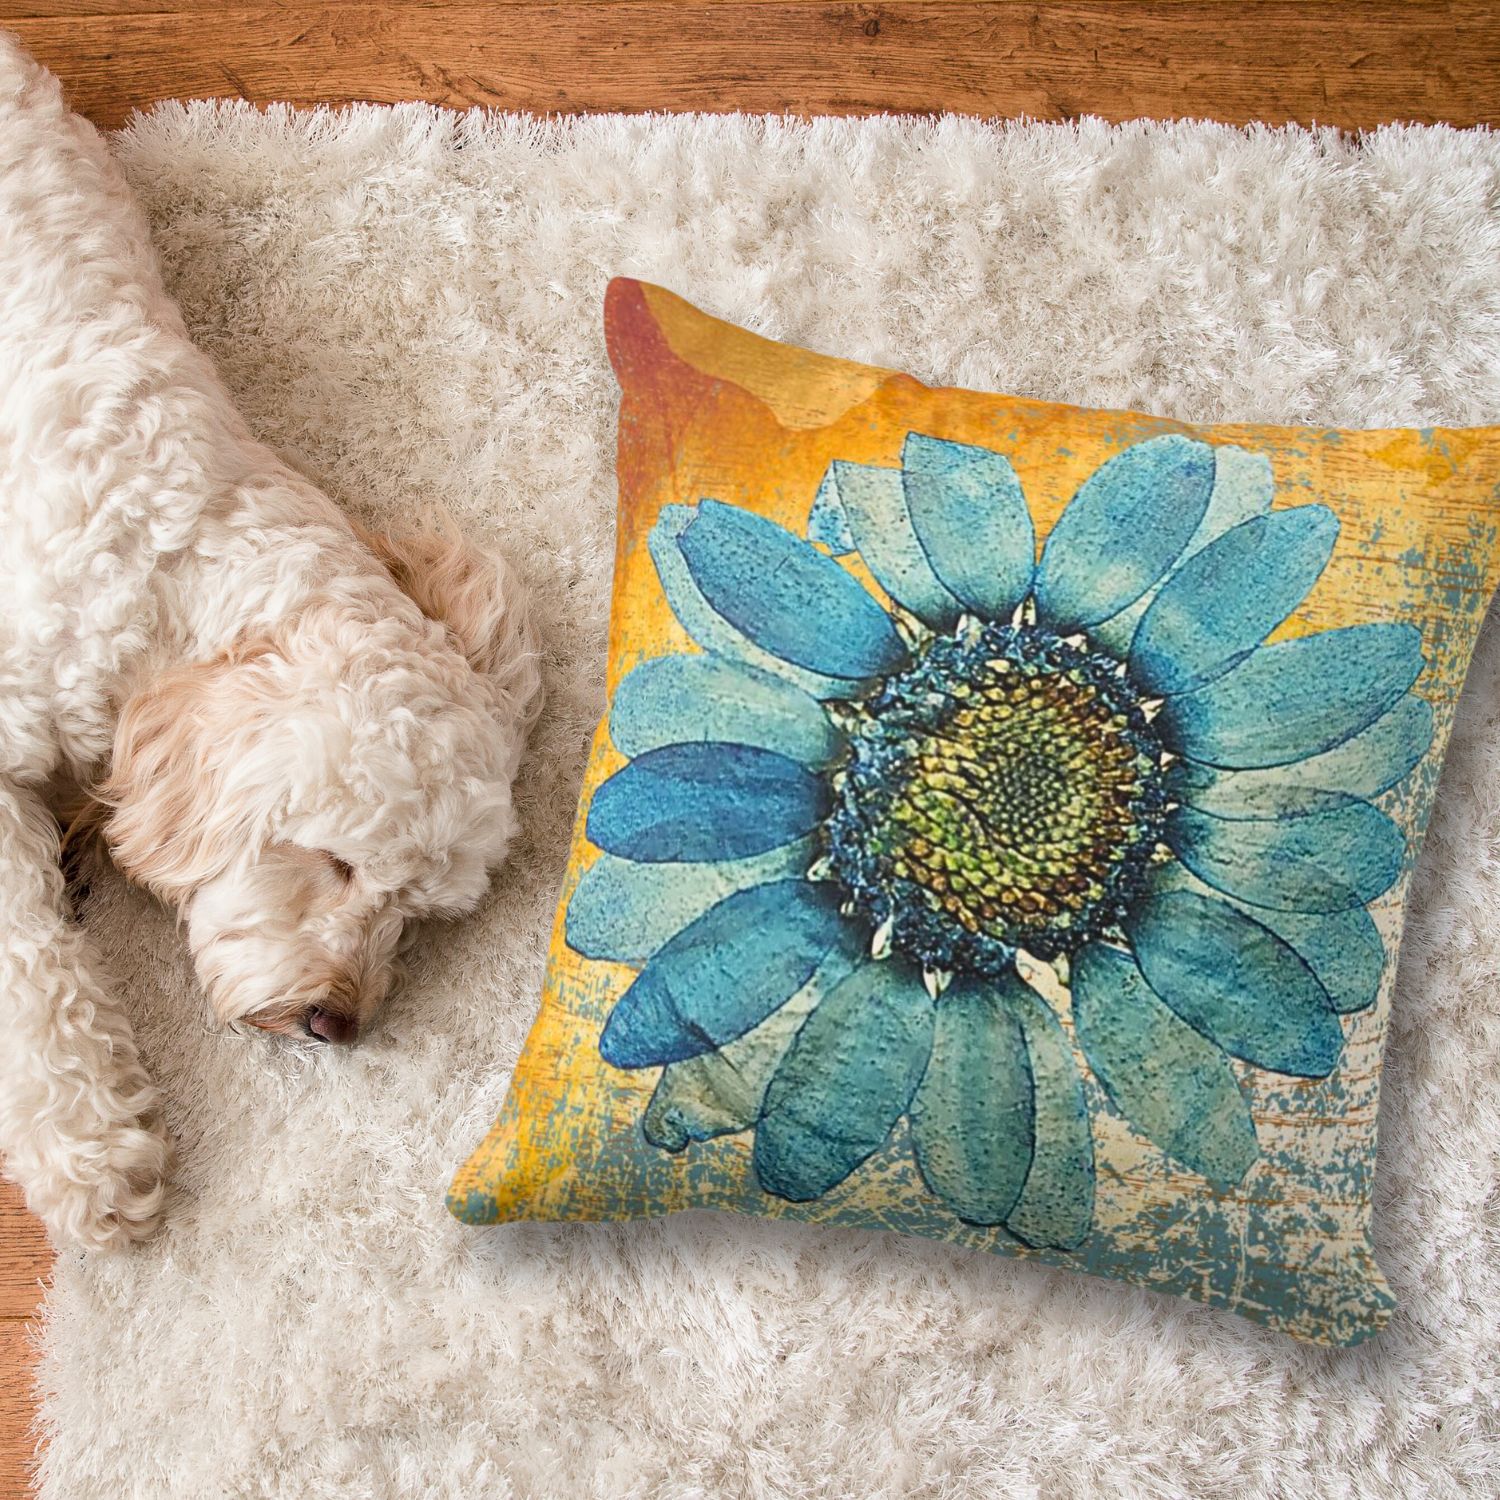 Large blue gerbera with orange washed out background on a white rug, and a dog sleeping on the side.